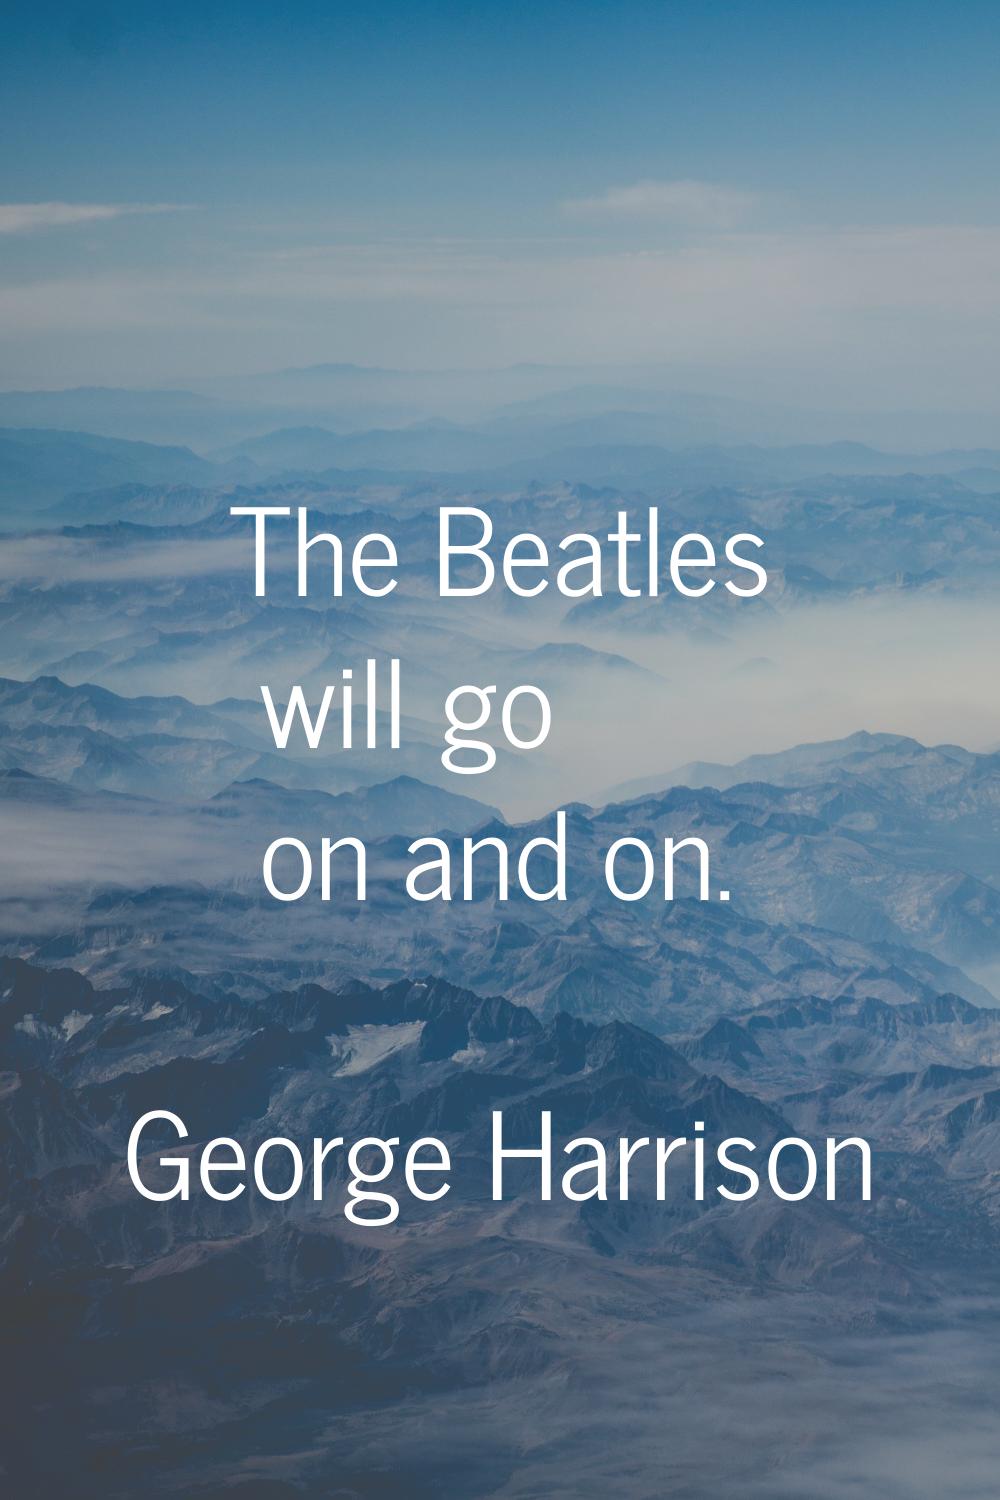 The Beatles will go on and on.